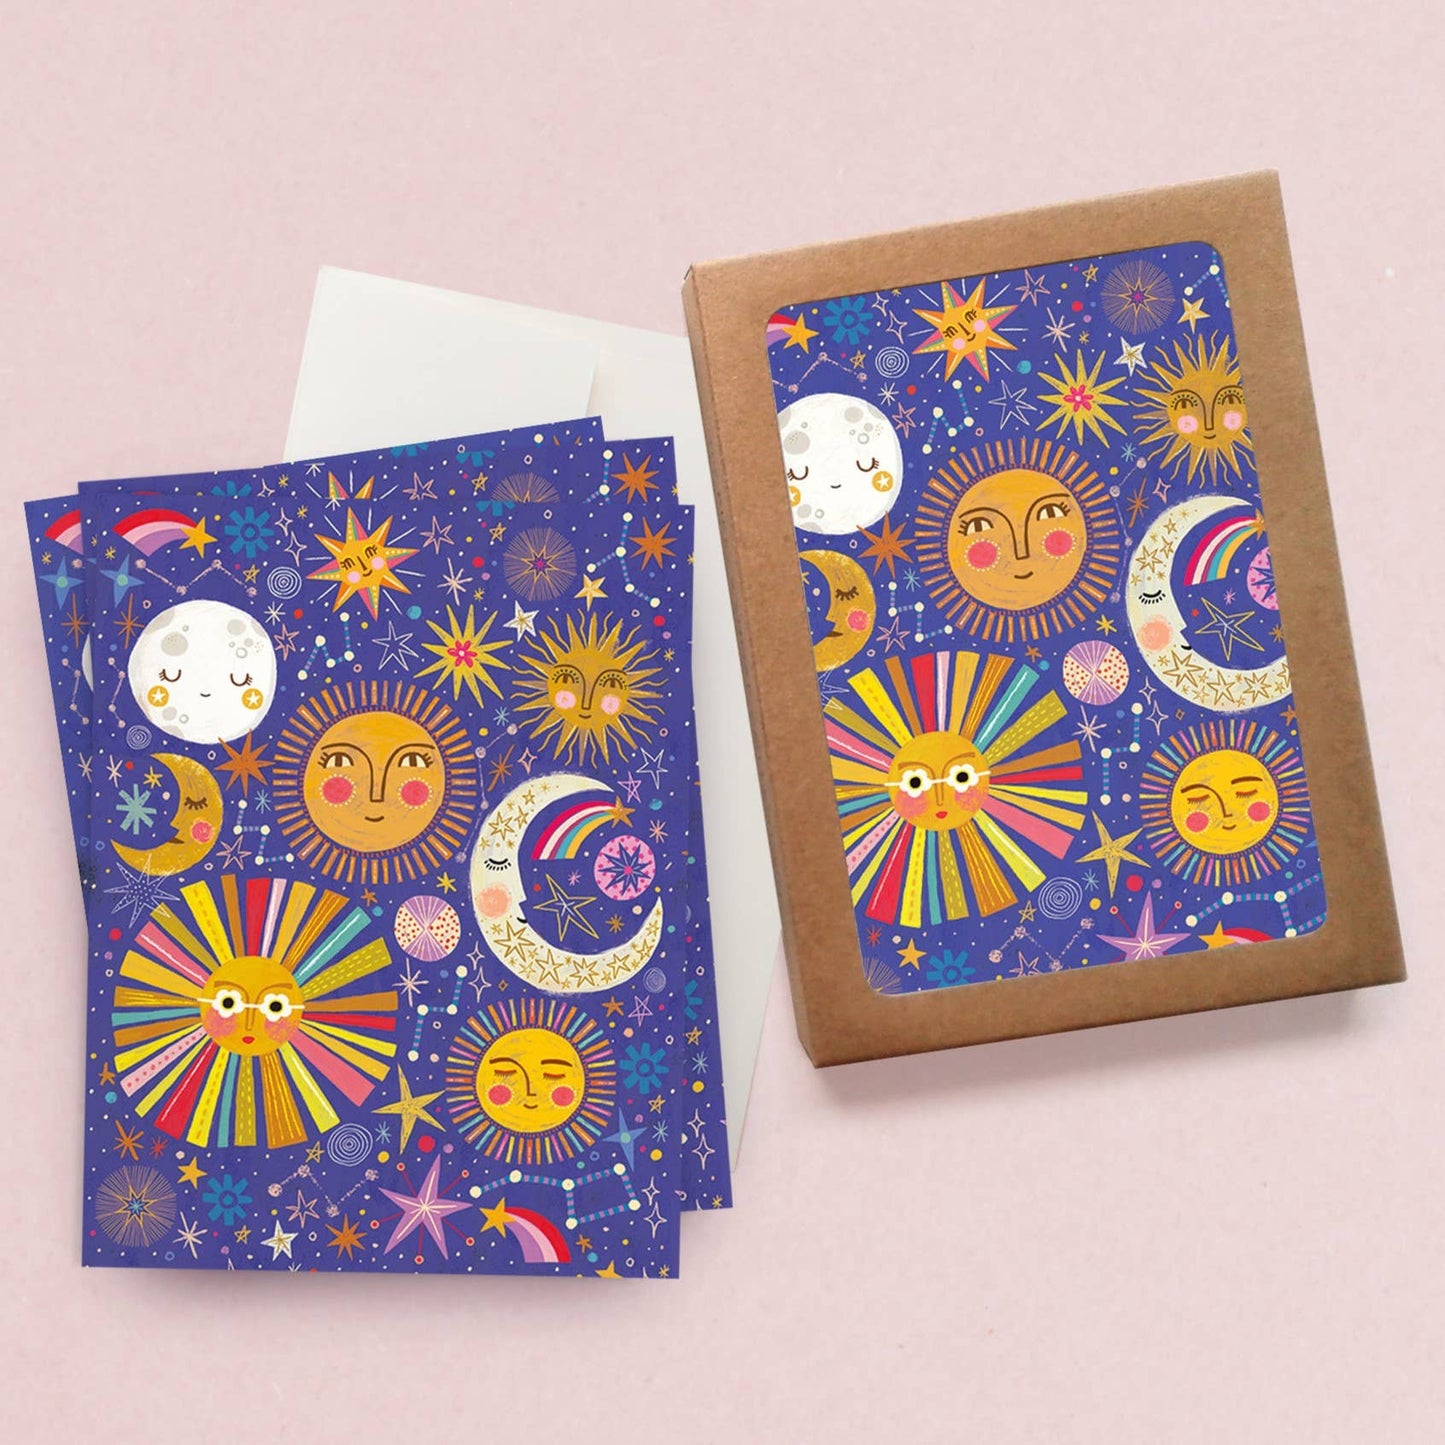 Suns & Moons Boxed Cards - Set of 10